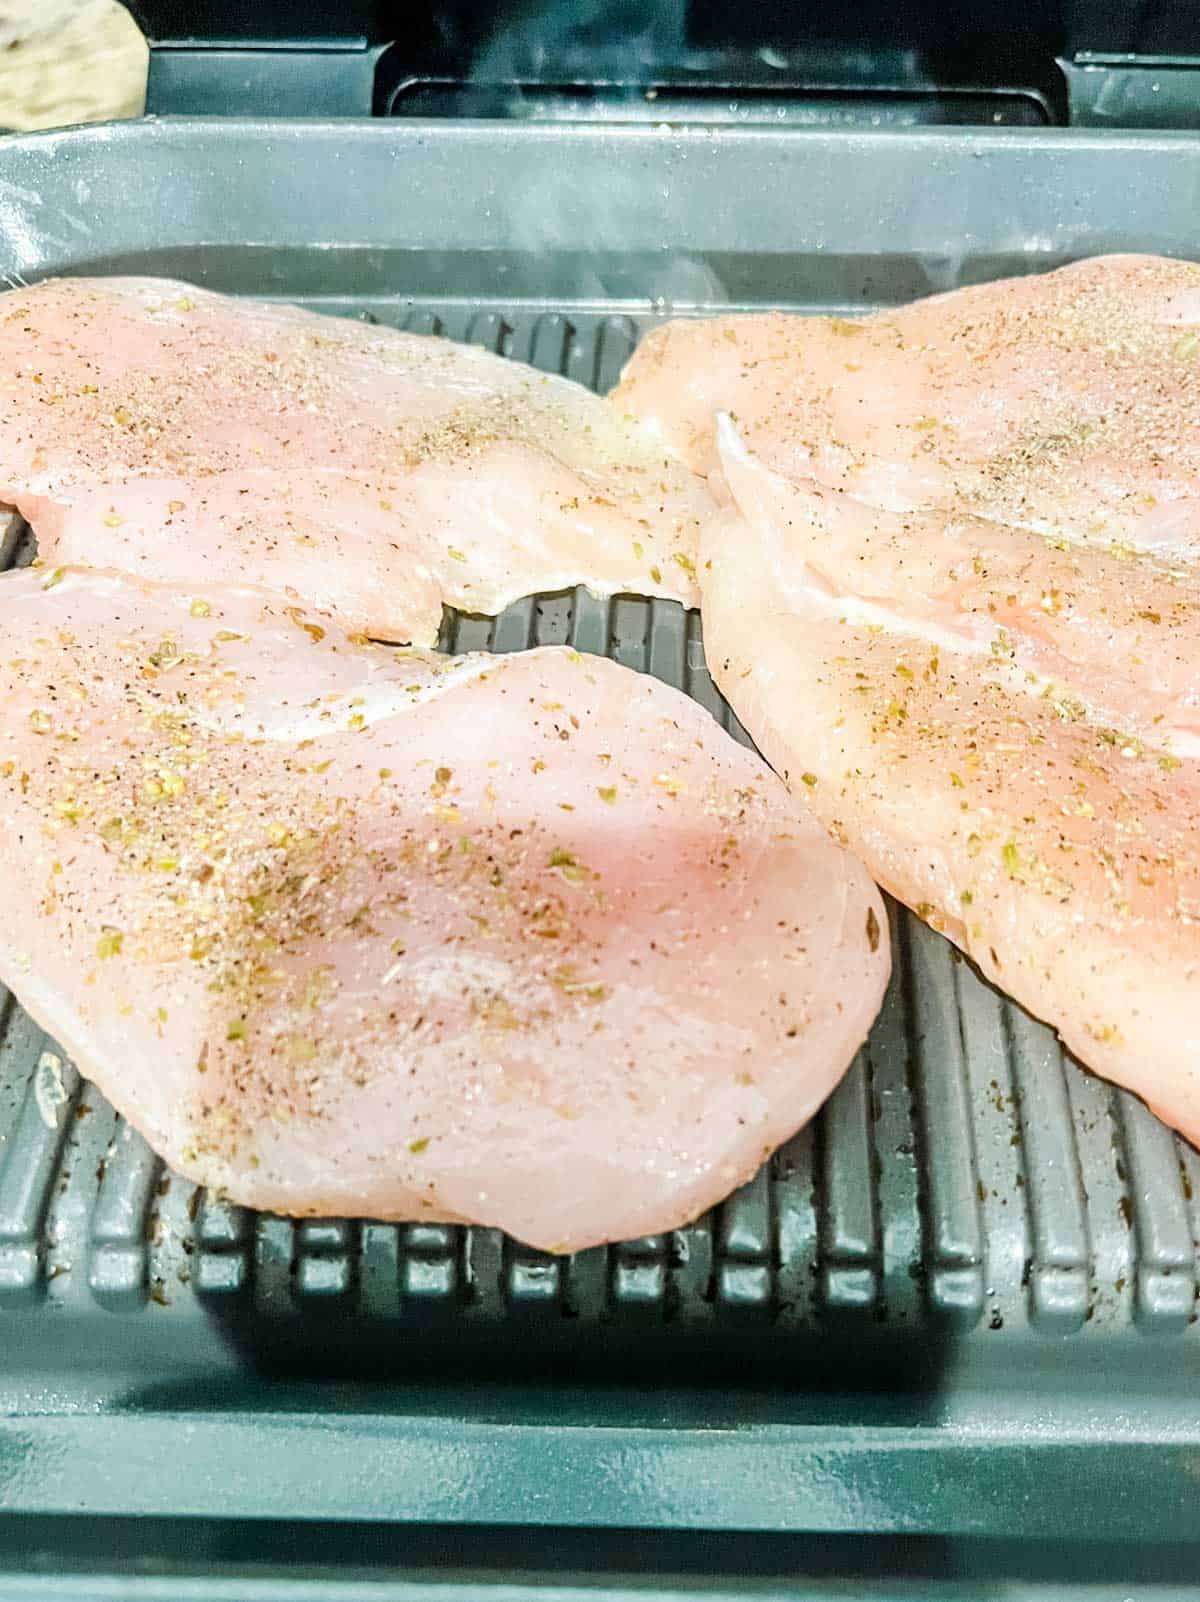 Photo of seasoned raw chicken that has just been placed on a Ninja Foodi Grill.